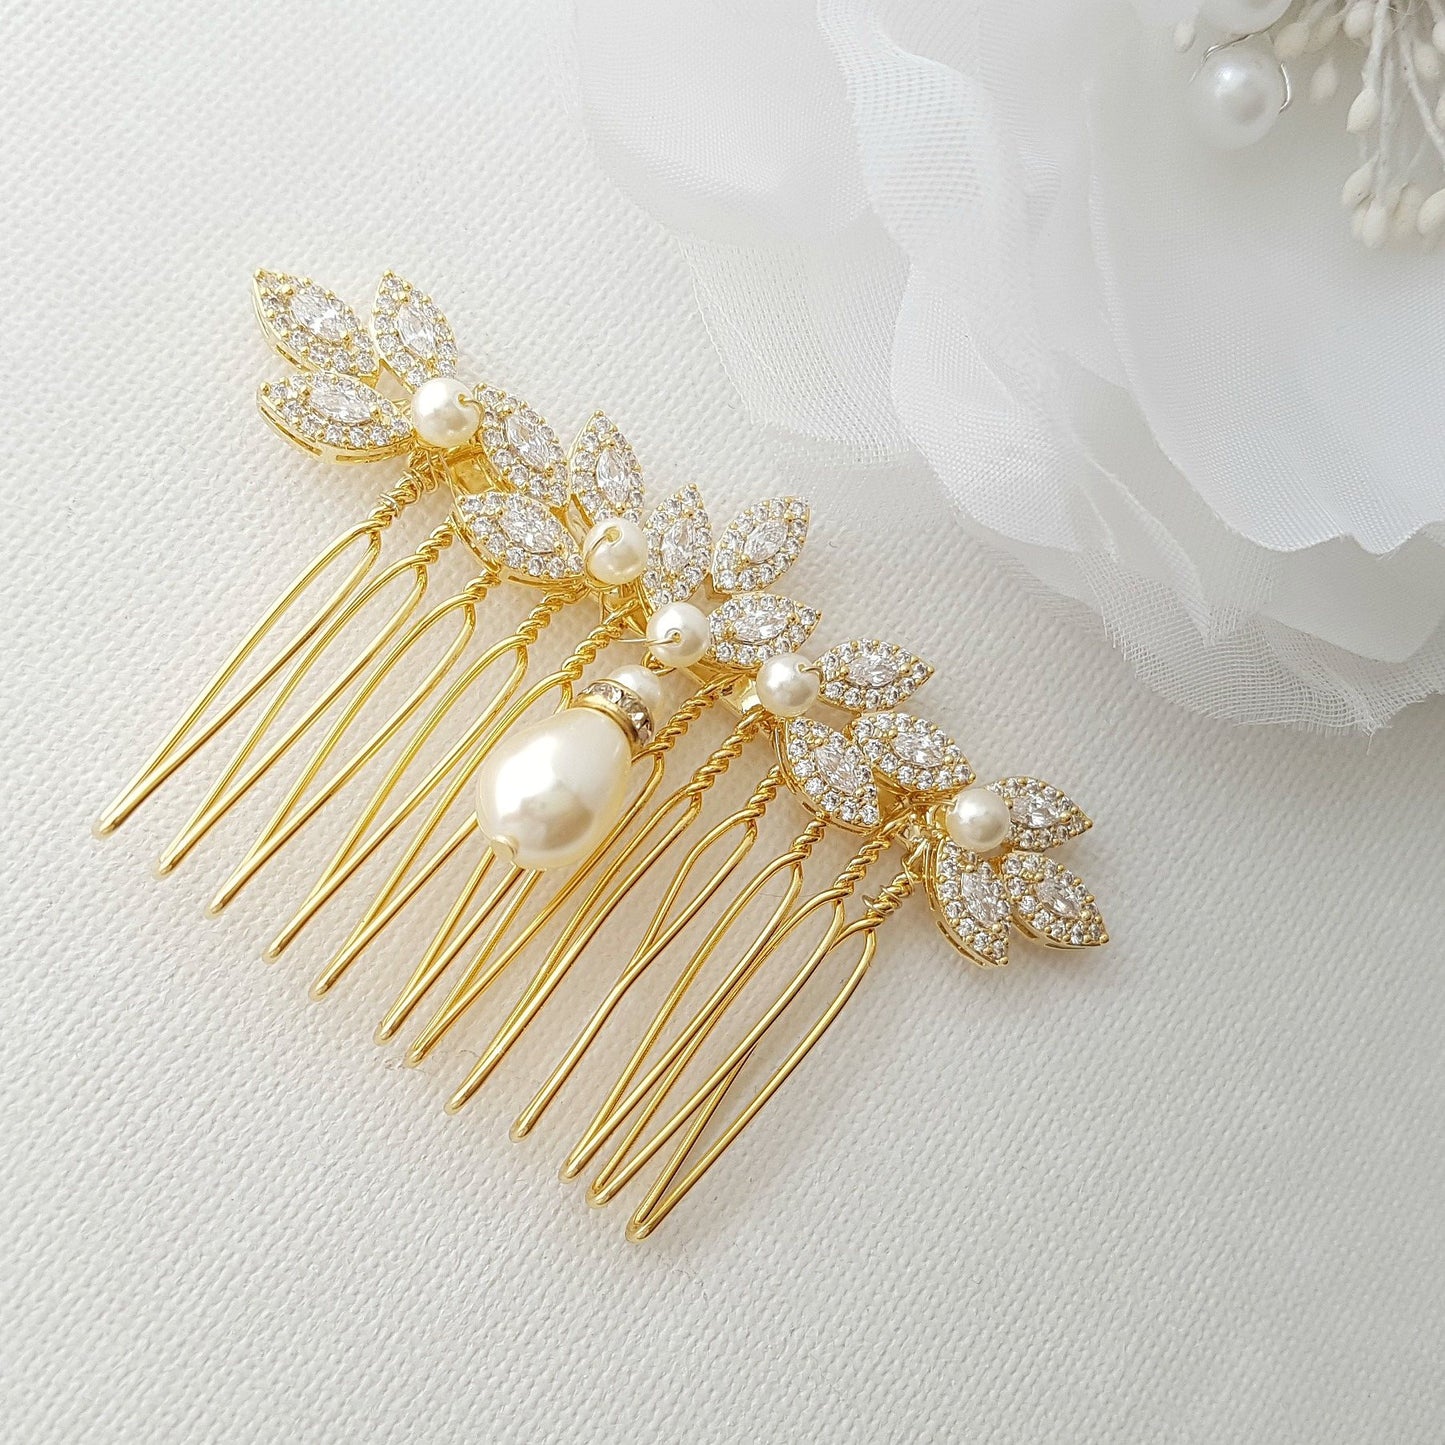 Gold Bridal Comb, Pearl Hair Comb, Rose Gold Wedding Hair Comb, Leaf Hairpiece, Crystal Hair Comb, Bridal Accessories, Abby - PoetryDesigns